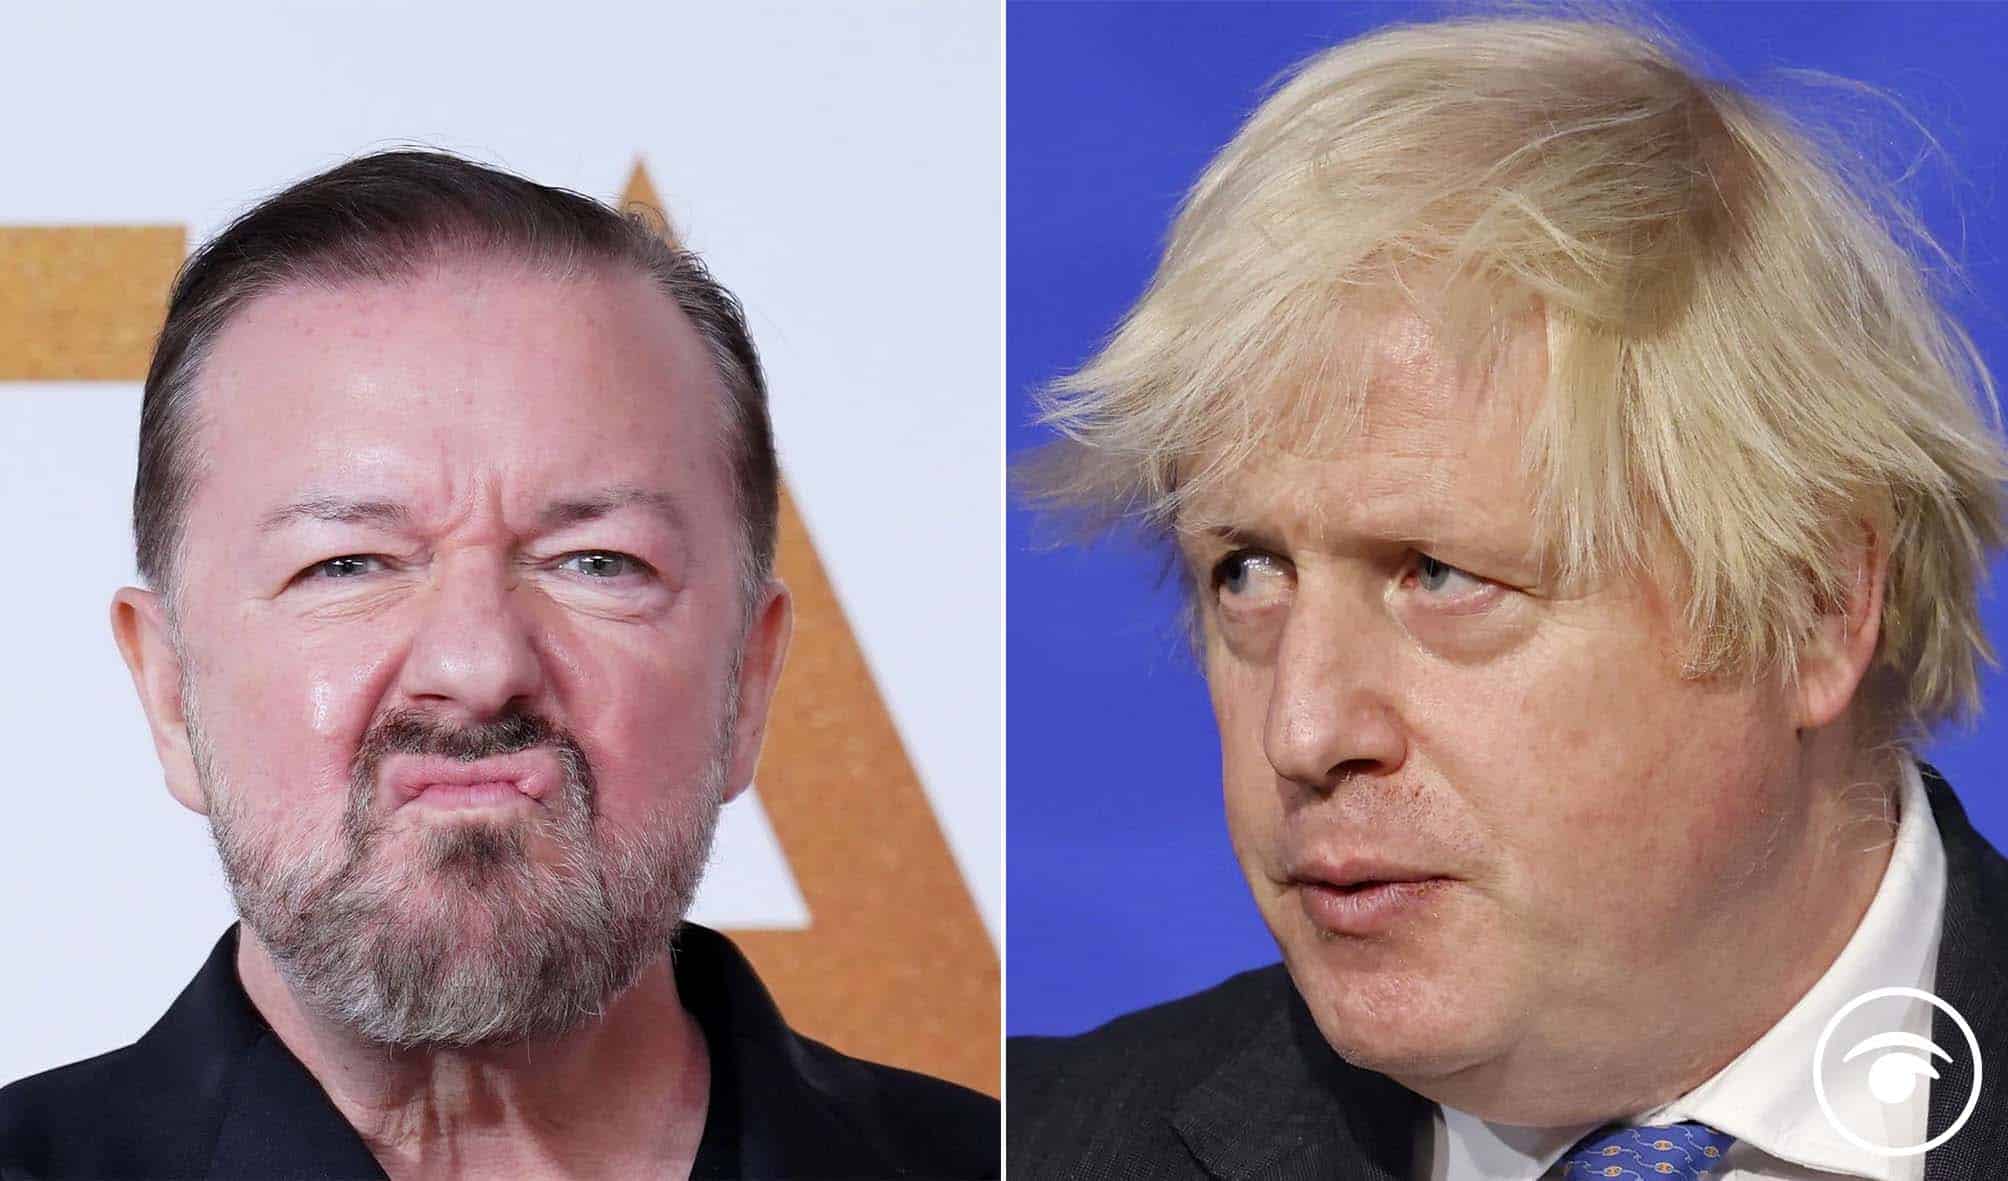 Watch: Ricky Gervais rages at ‘rule-breaking’ Tories in expletive-laden rant